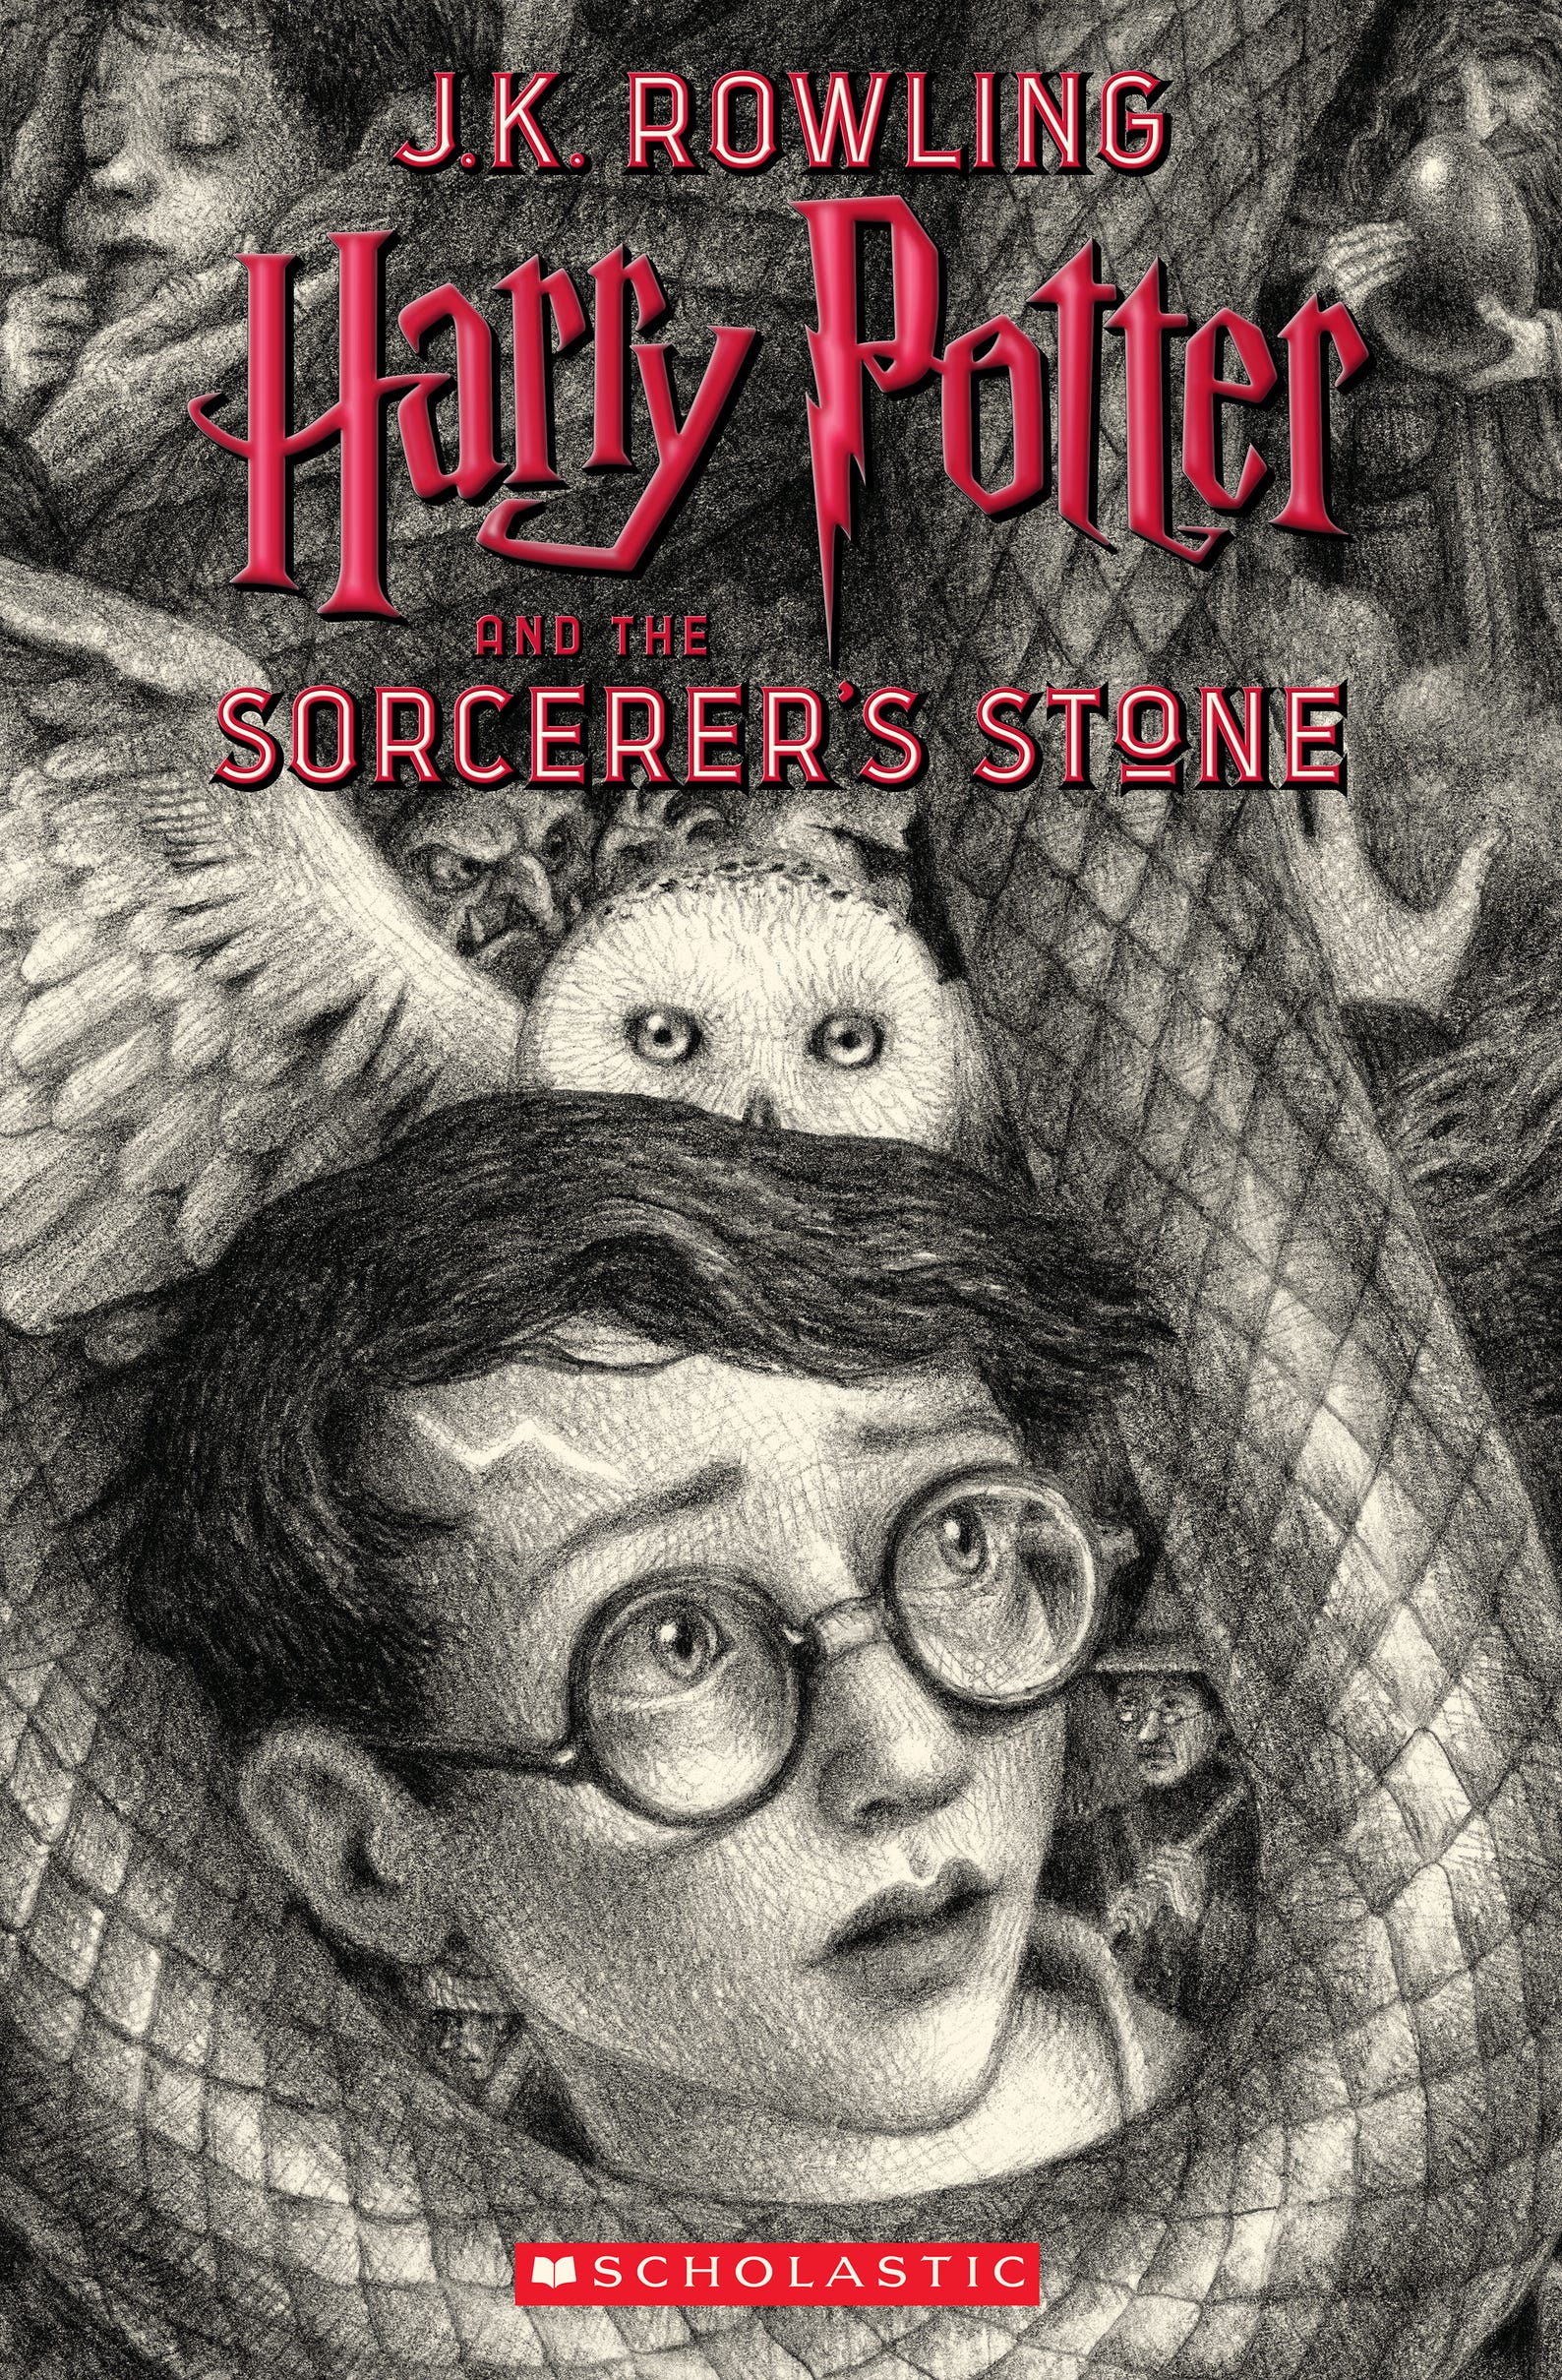 Photos: 'Harry Potter' 20th Anniversary Covers